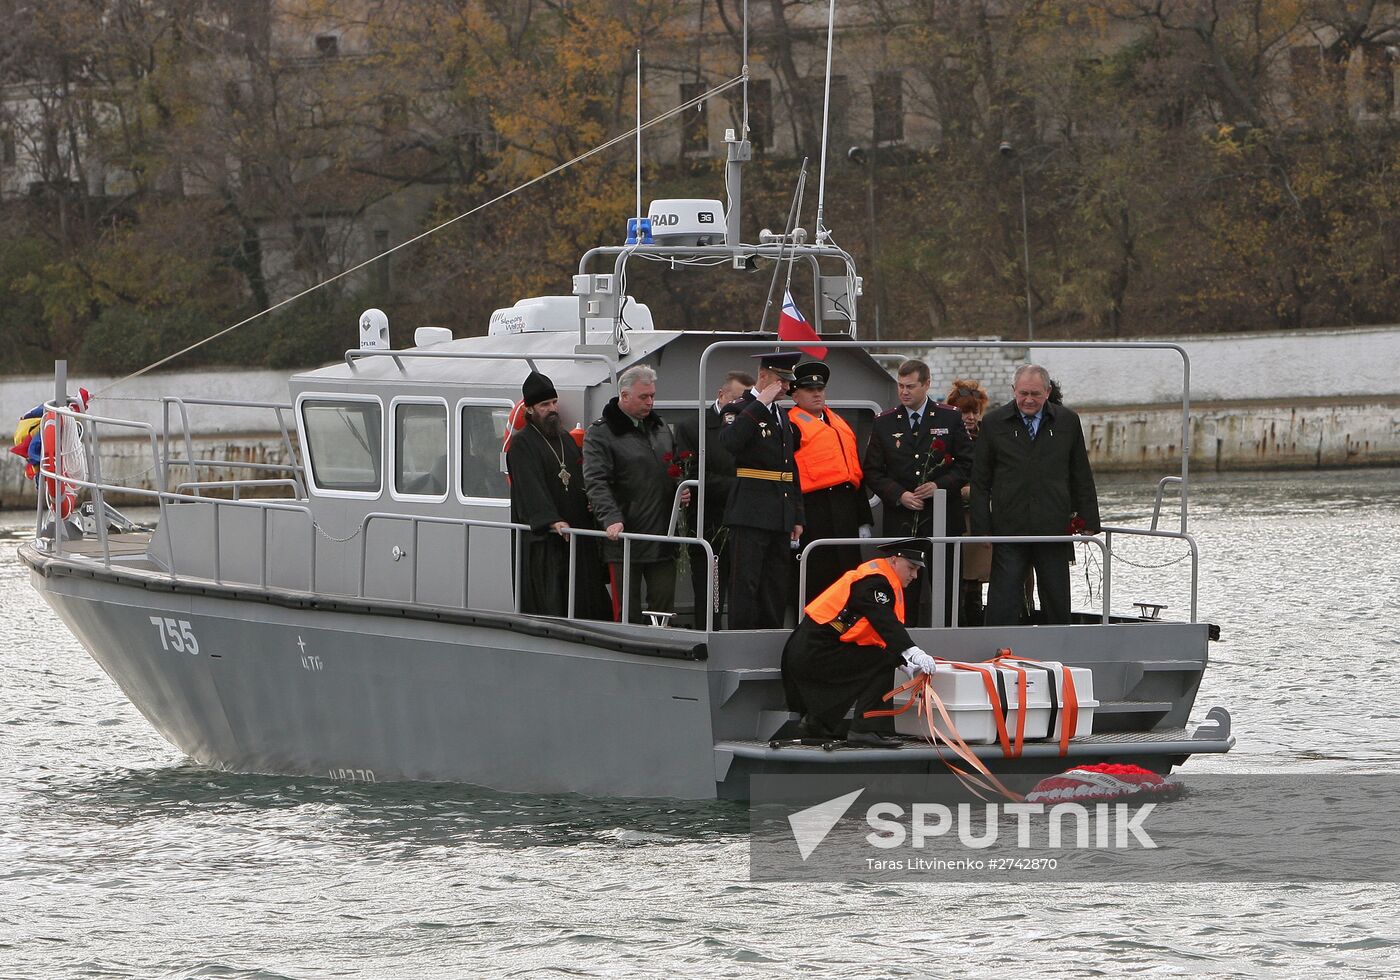 Boats officially join the fleet of Russia's Interior Ministry maritime units